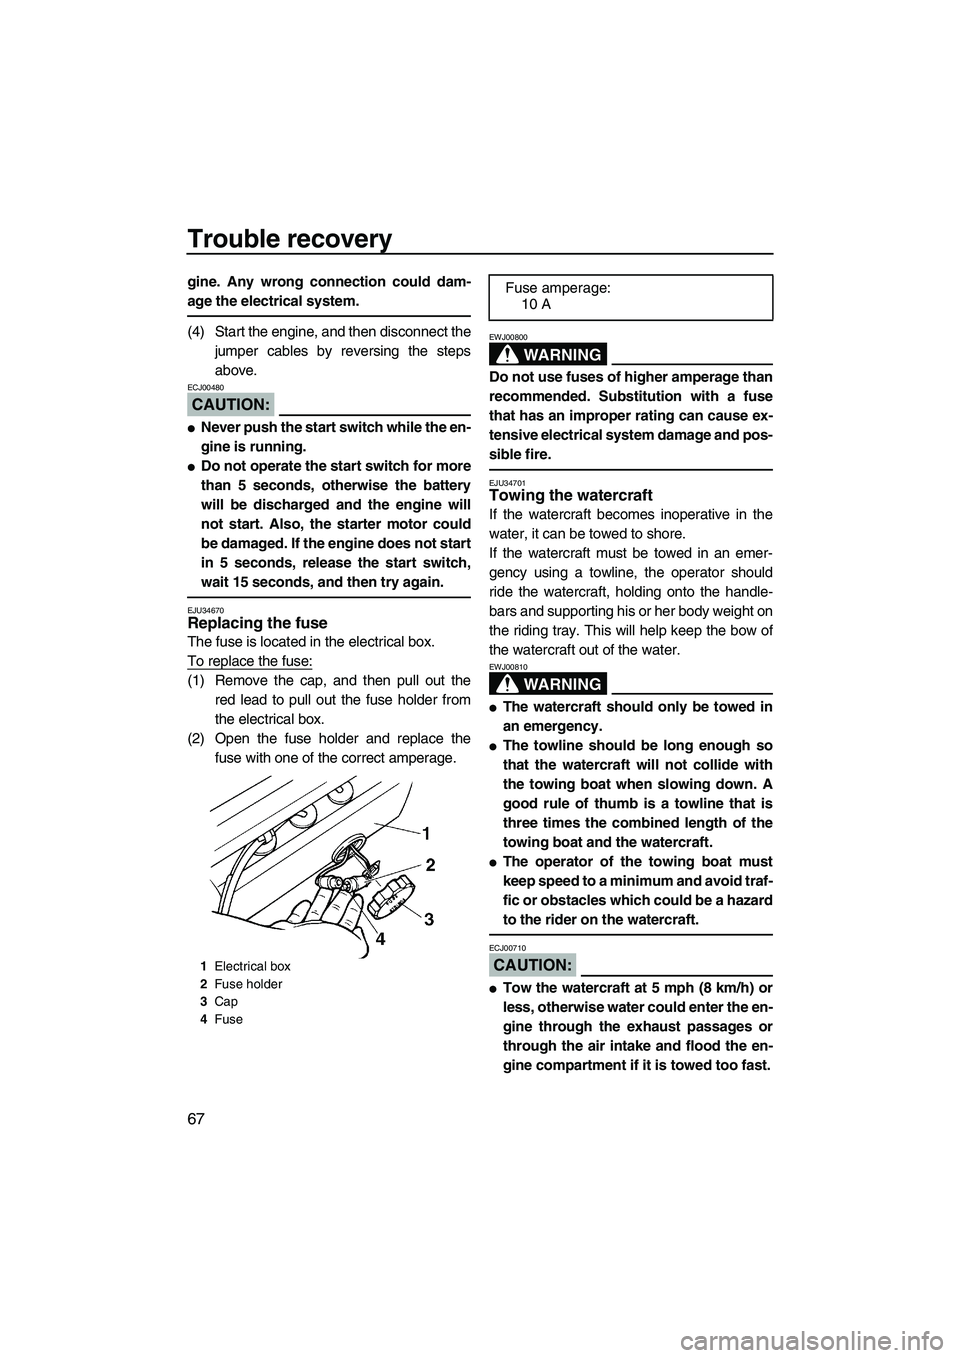 YAMAHA SUPERJET 2008  Owners Manual Trouble recovery
67
gine. Any wrong connection could dam-
age the electrical system.
(4) Start the engine, and then disconnect the
jumper cables by reversing the steps
above.
CAUTION:
ECJ00480
Never 